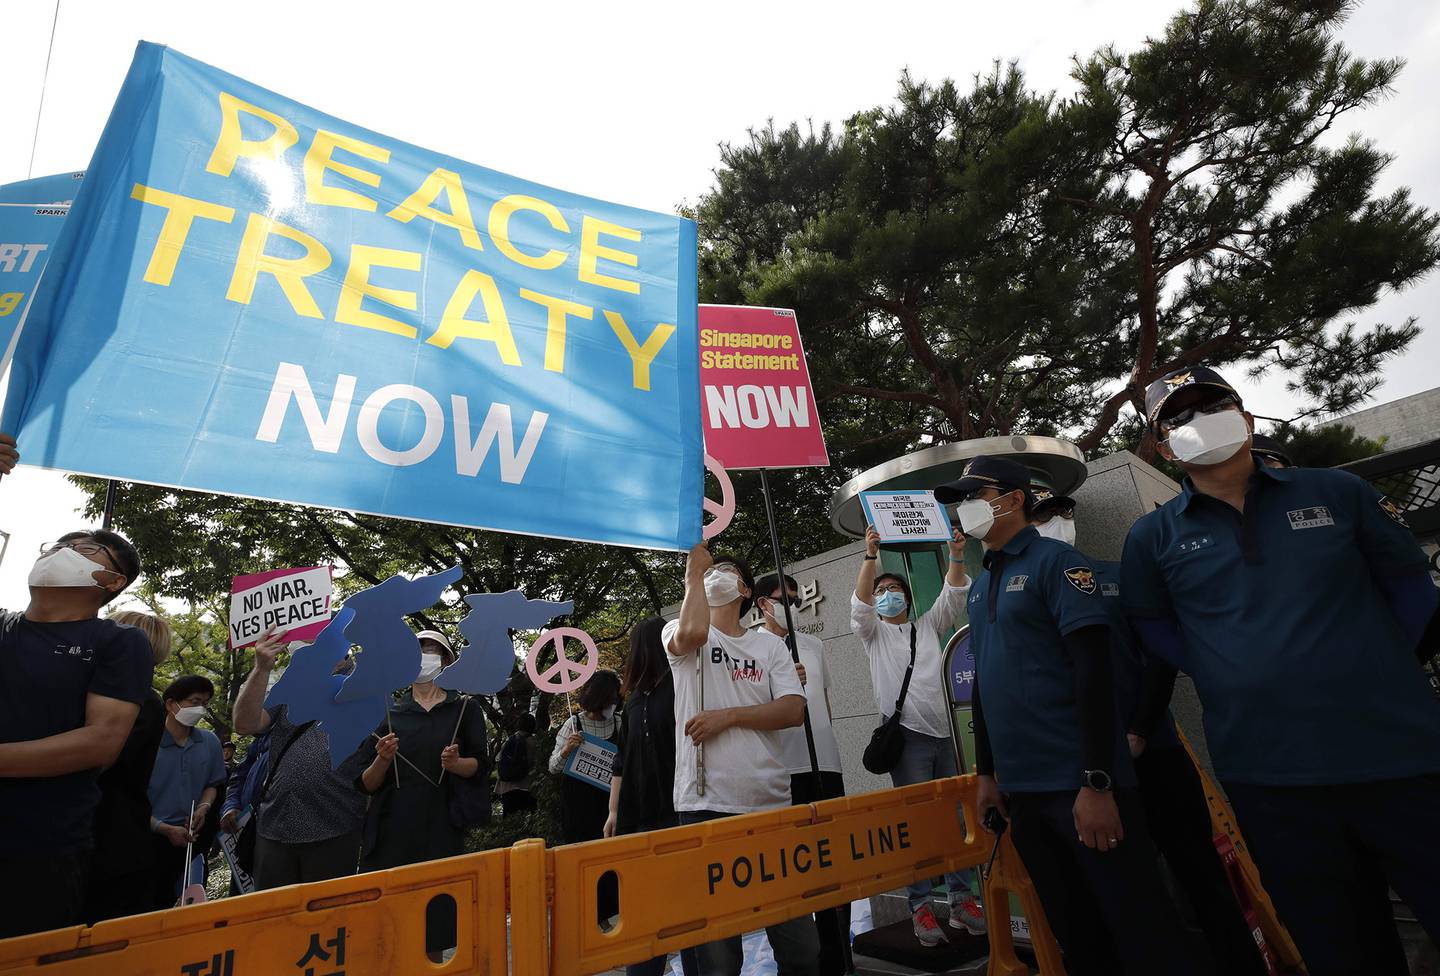 Protesters wearing face masks hold banners as police officers stand guard during a rally to demand the peace on the Korean Peninsula and to stop sanctions against North Korea in front of Foreign Ministry before U.S. Deputy Secretary of State Stephen Biegun's arrival to meet with South Korean officials in Seoul, South Korea, on July 8, 2020.